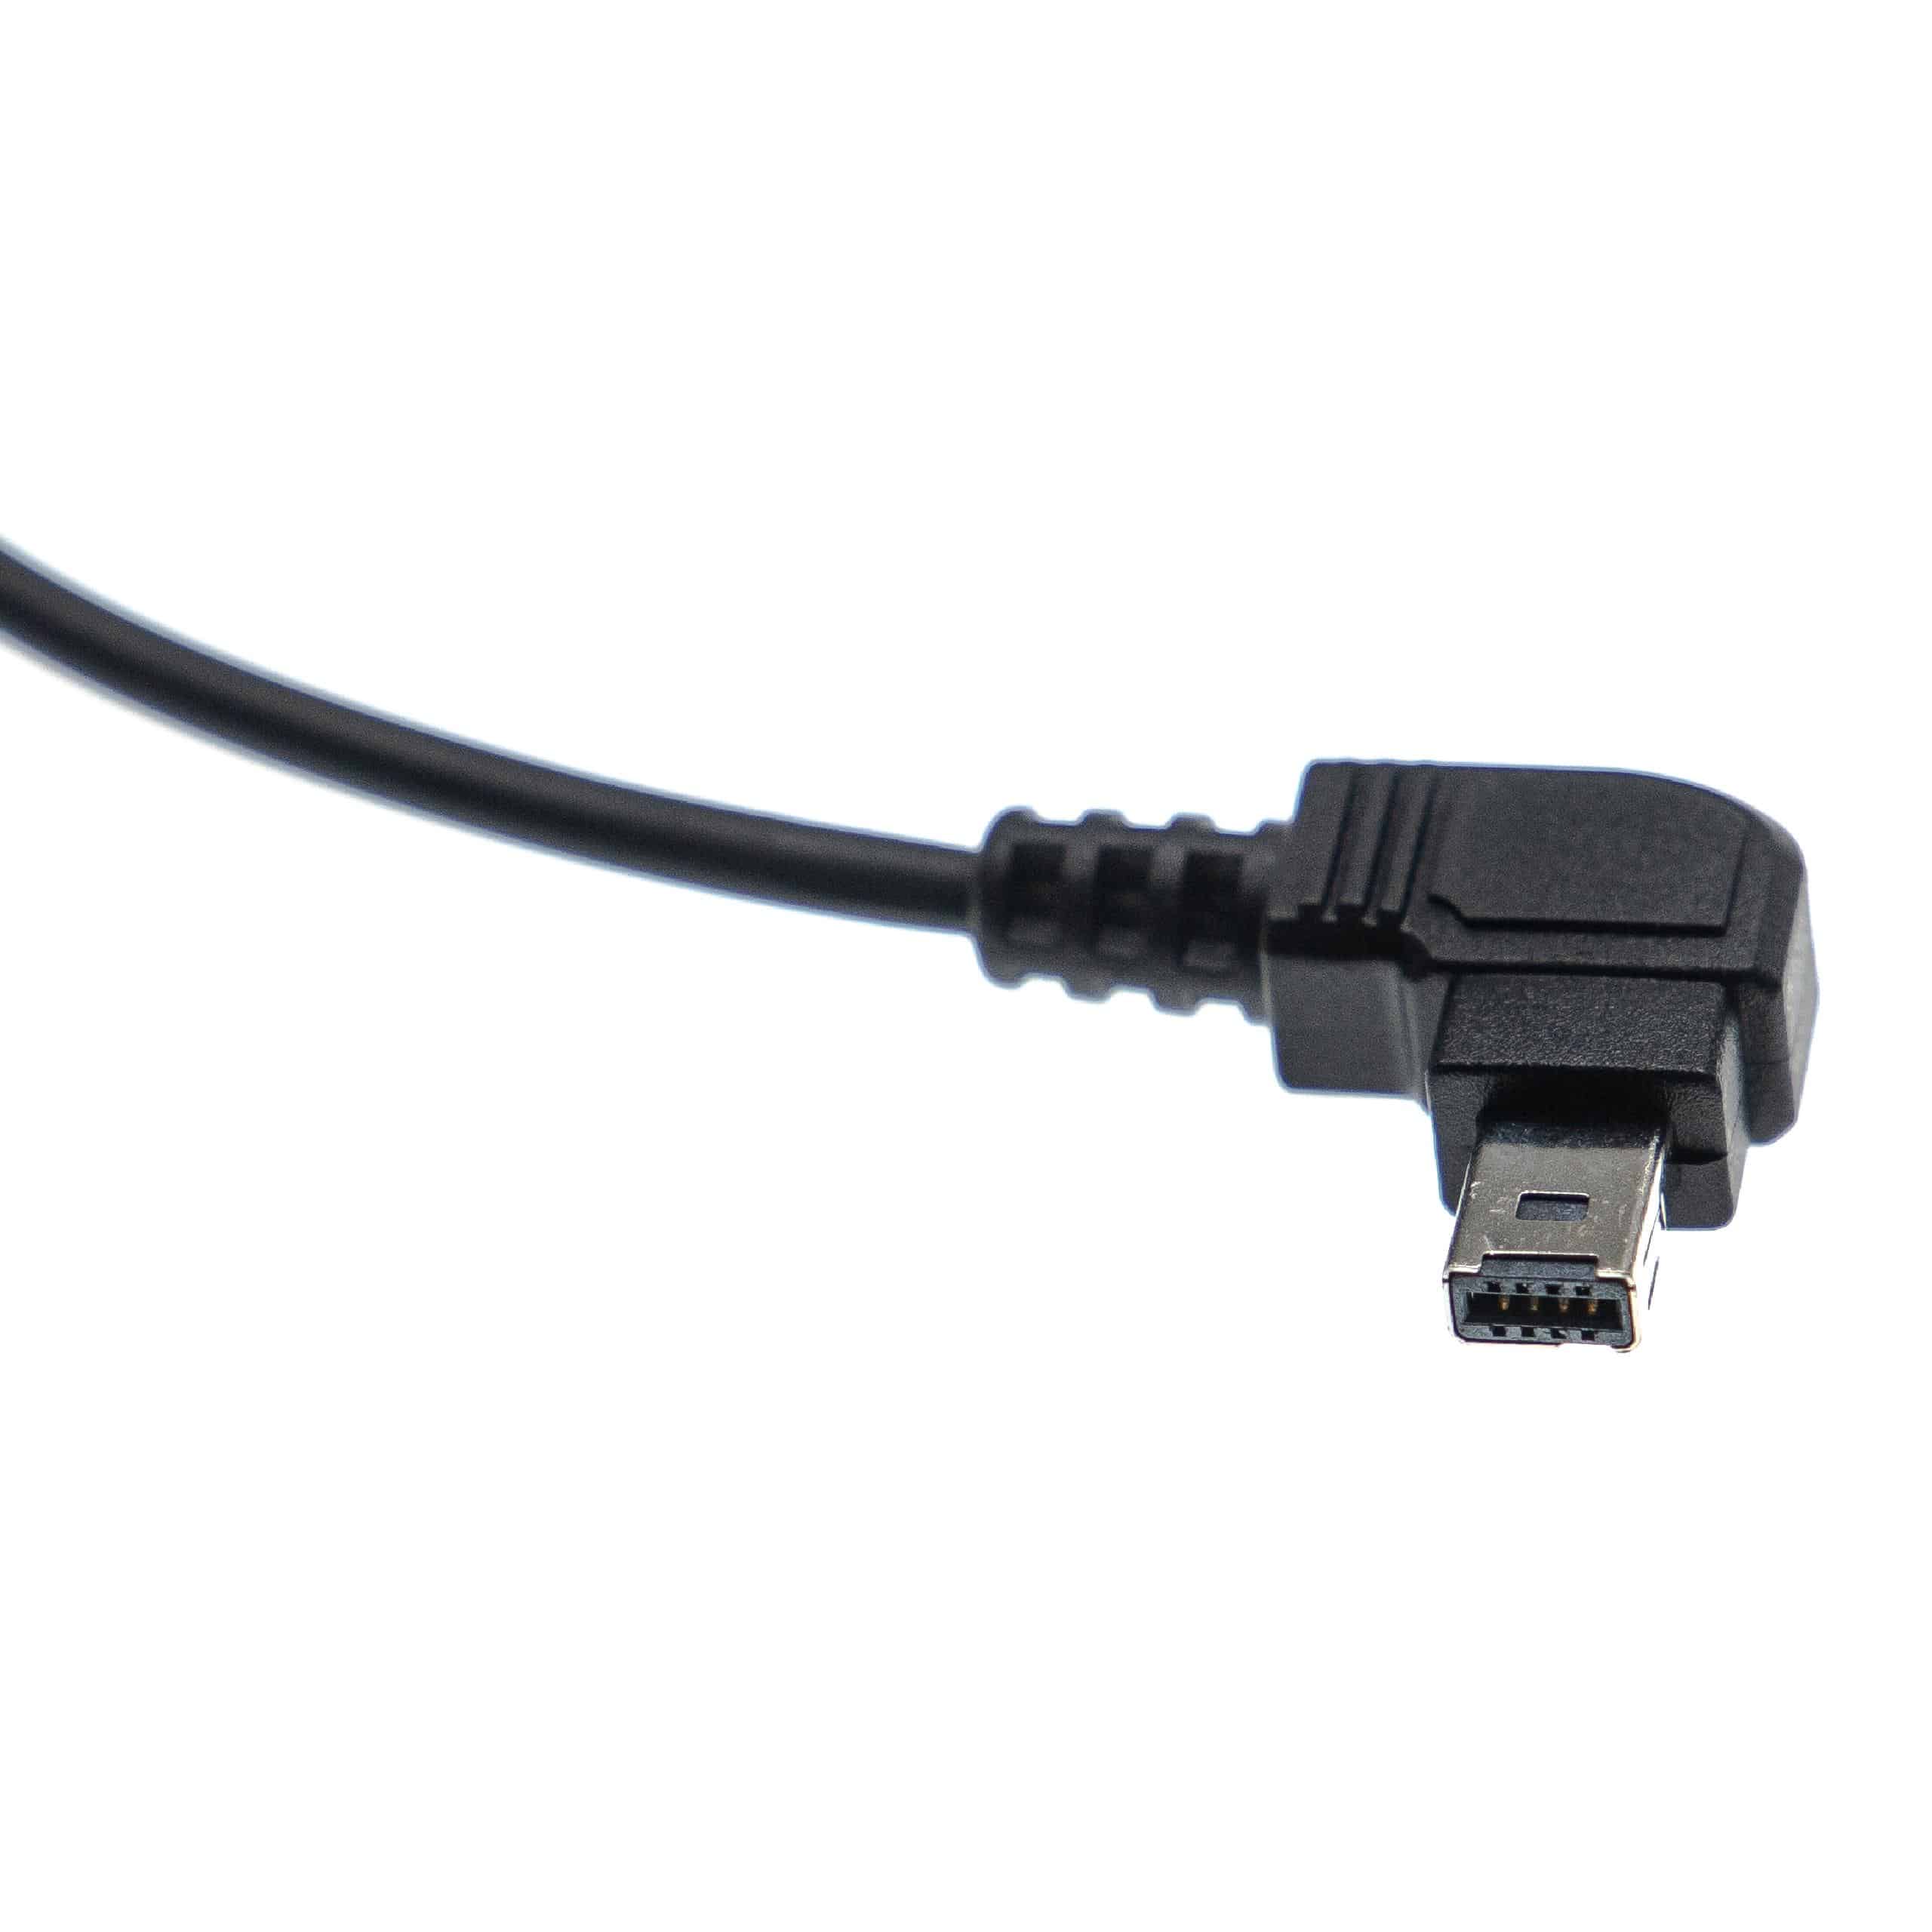 Cable for Shutter Release replaces Nikon DC2 for Nikon Camera - 15 cm